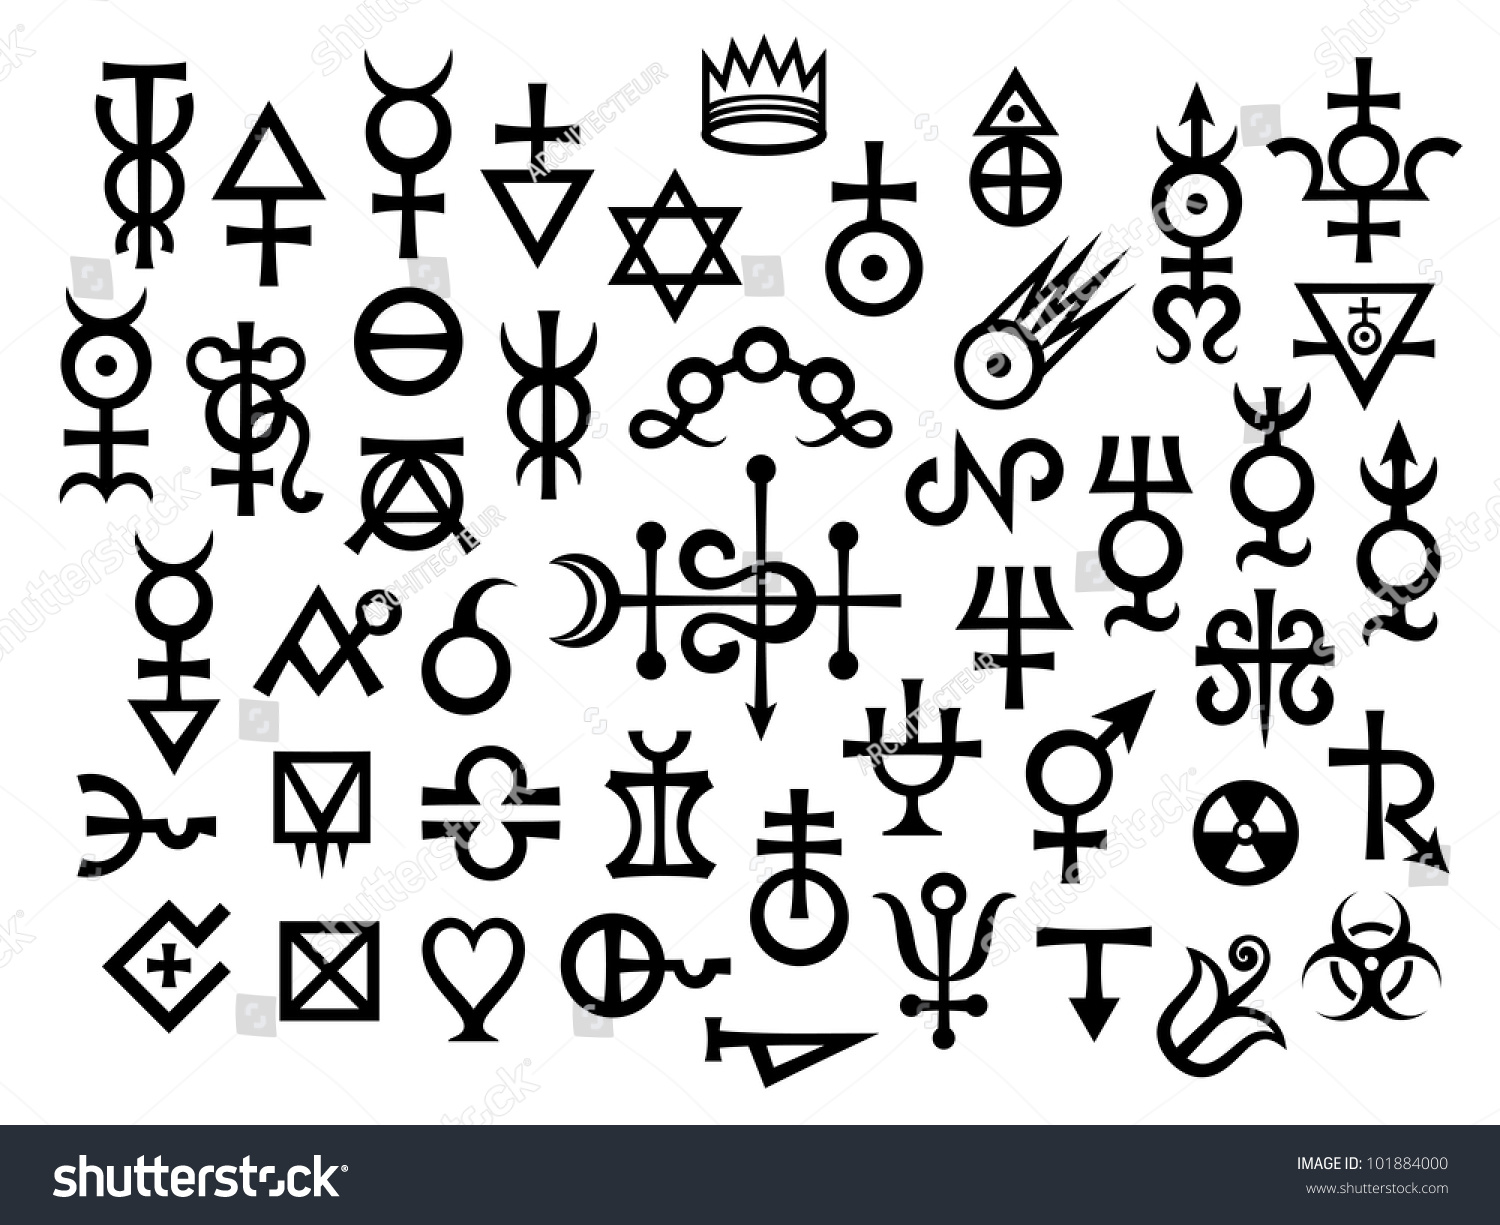 Alchemical Signs Part 3 Final Great Stock Vector 101884000 - Shutterstock